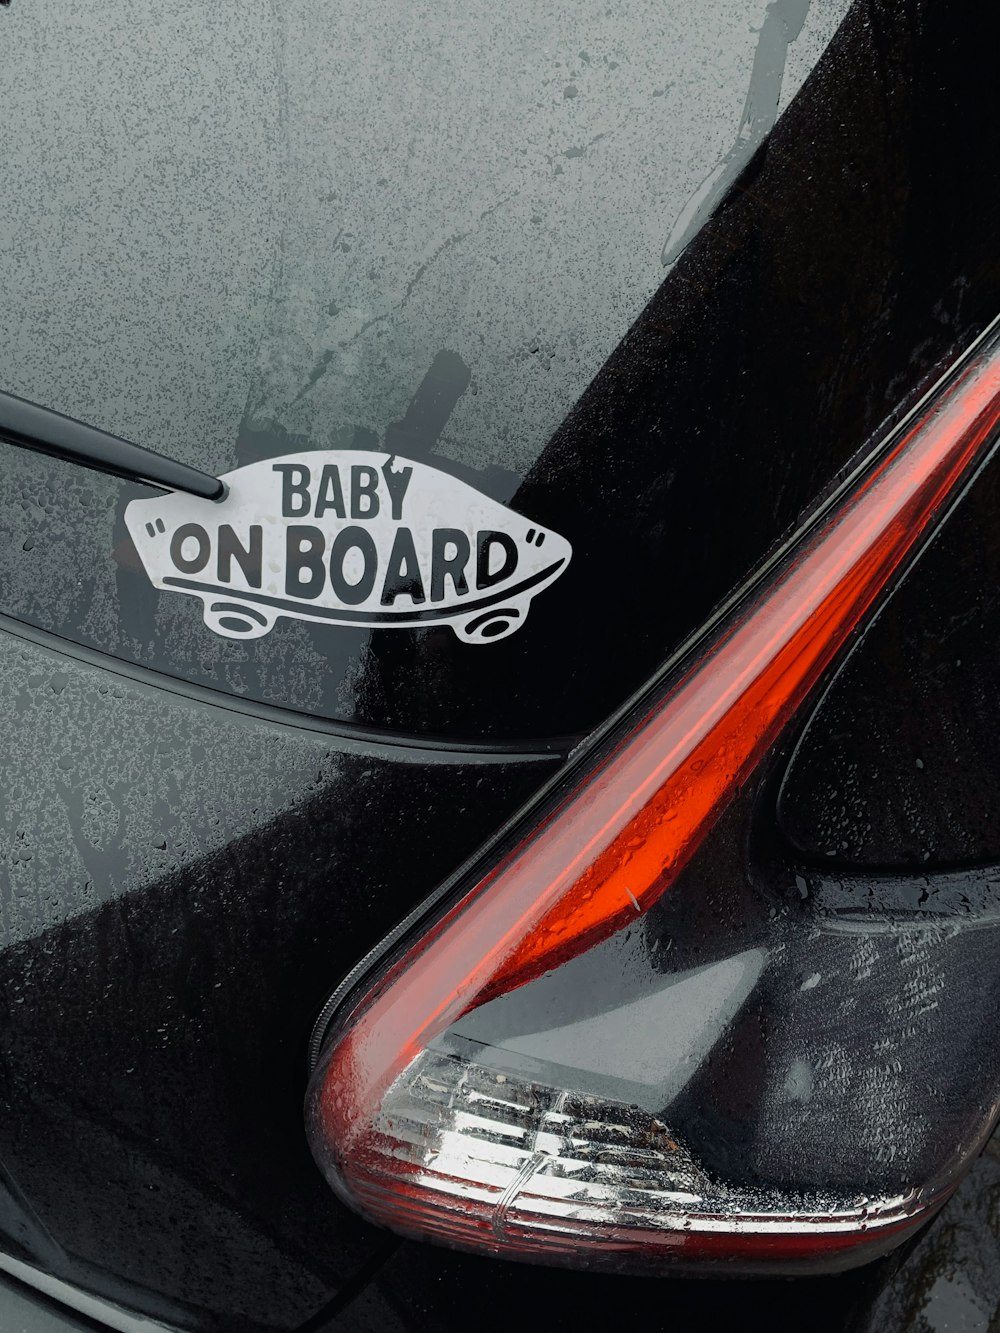 a close up of a car with a baby on board sticker on it